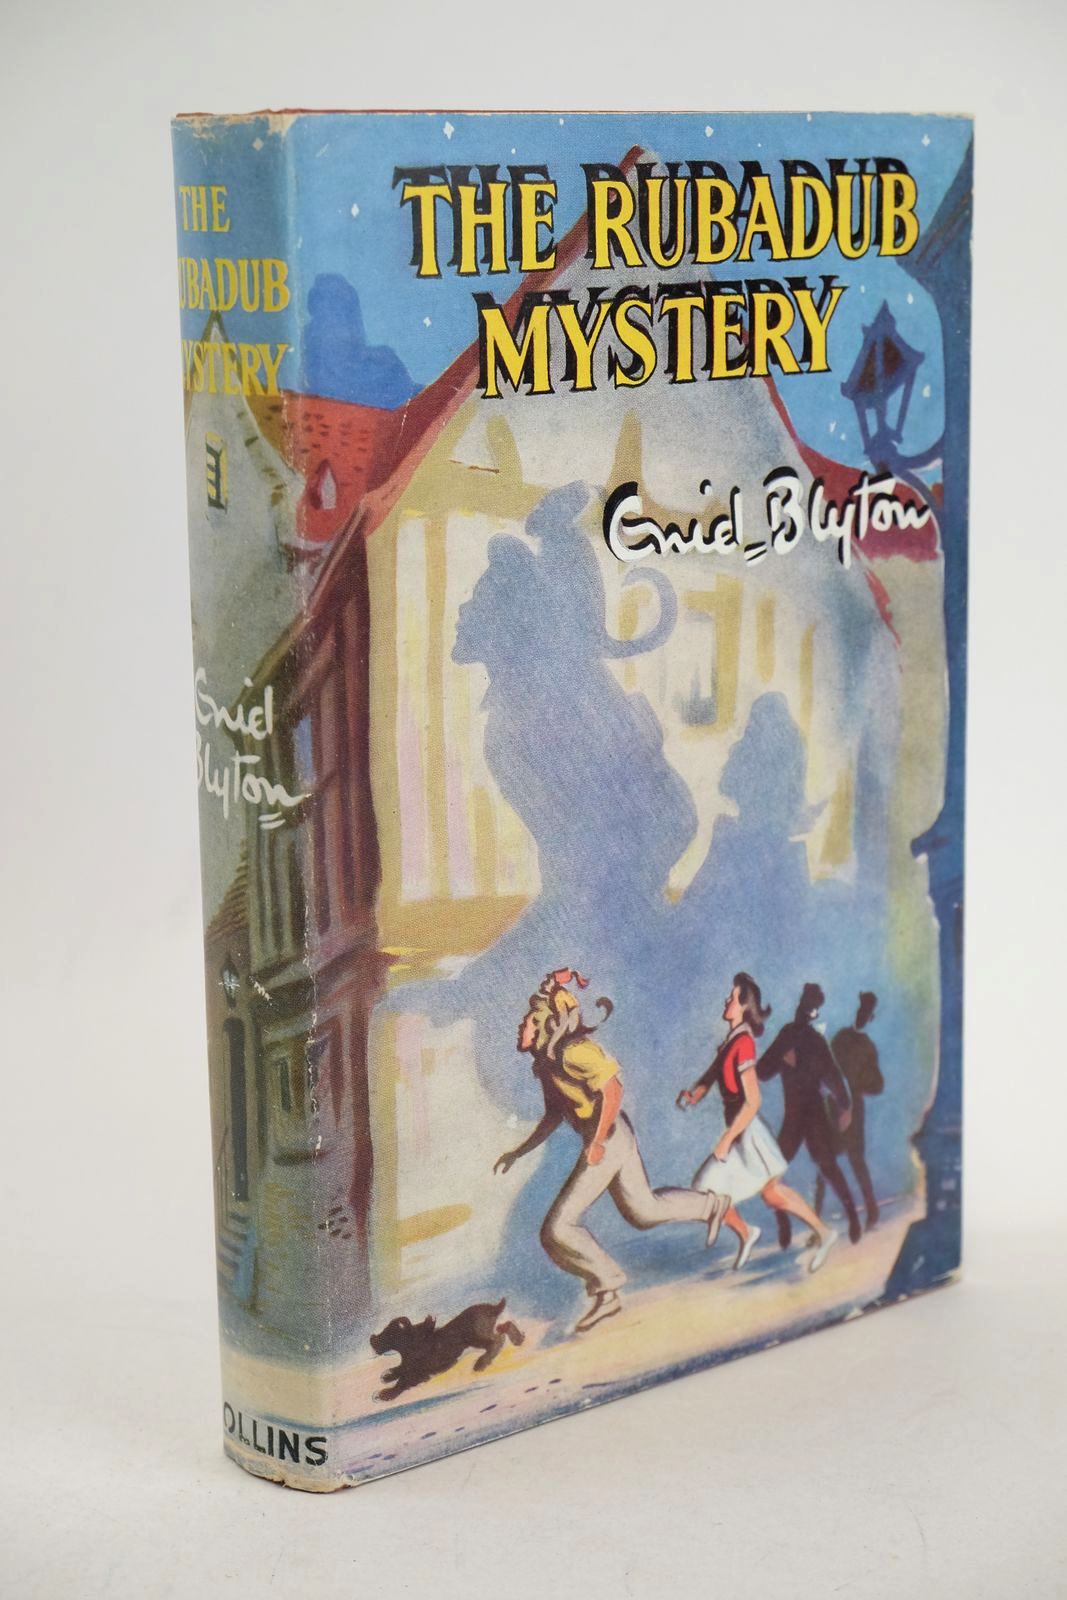 Photo of THE RUBADUB MYSTERY written by Blyton, Enid illustrated by Dunlop, Gilbert published by Collins (STOCK CODE: 1326896)  for sale by Stella & Rose's Books